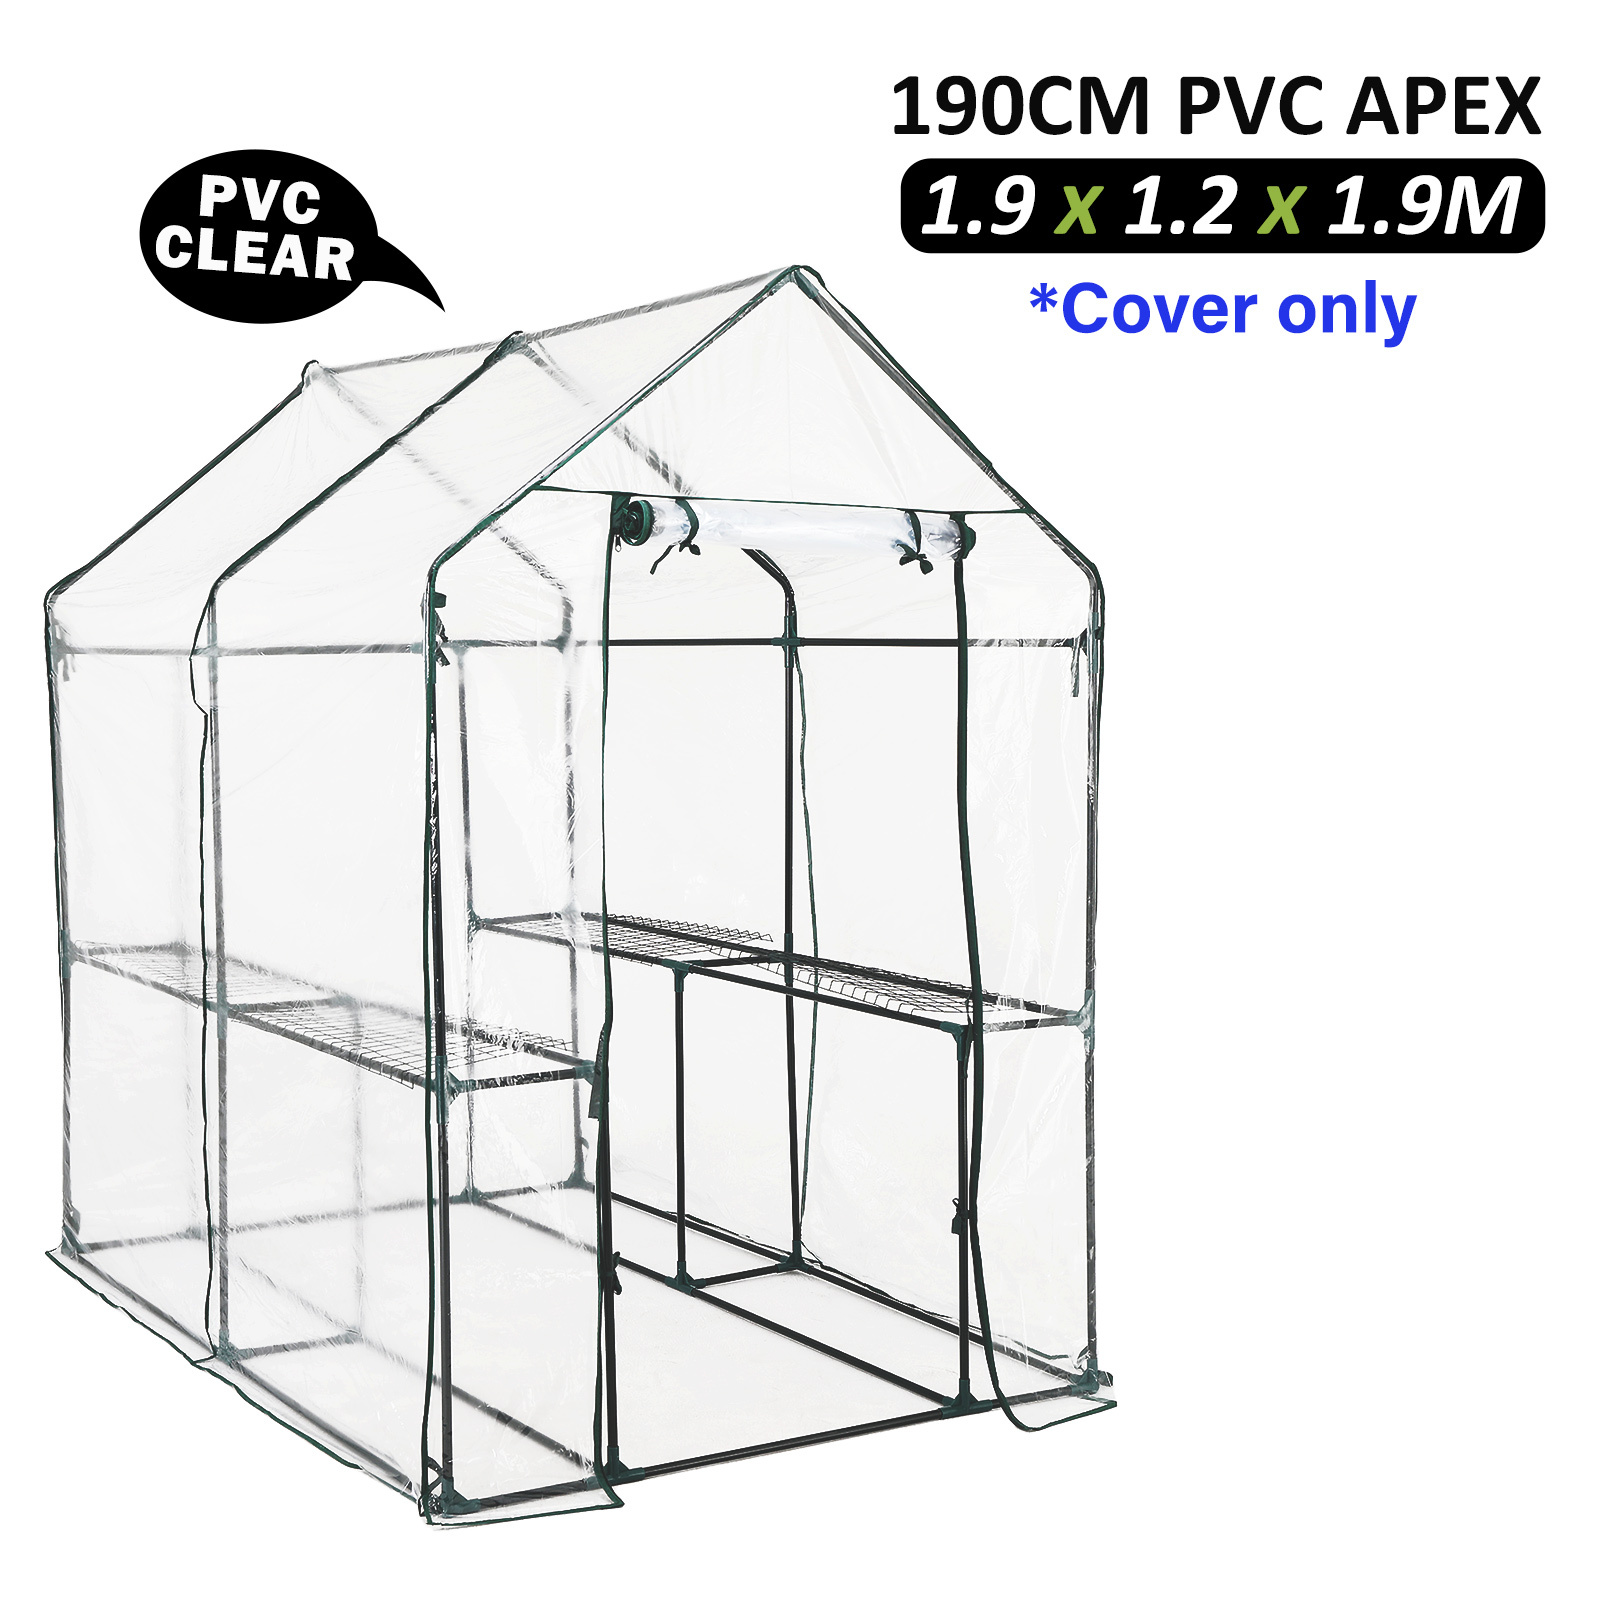 190cm Greenhouse PVC Apex Roof Cover Only - CLEAR